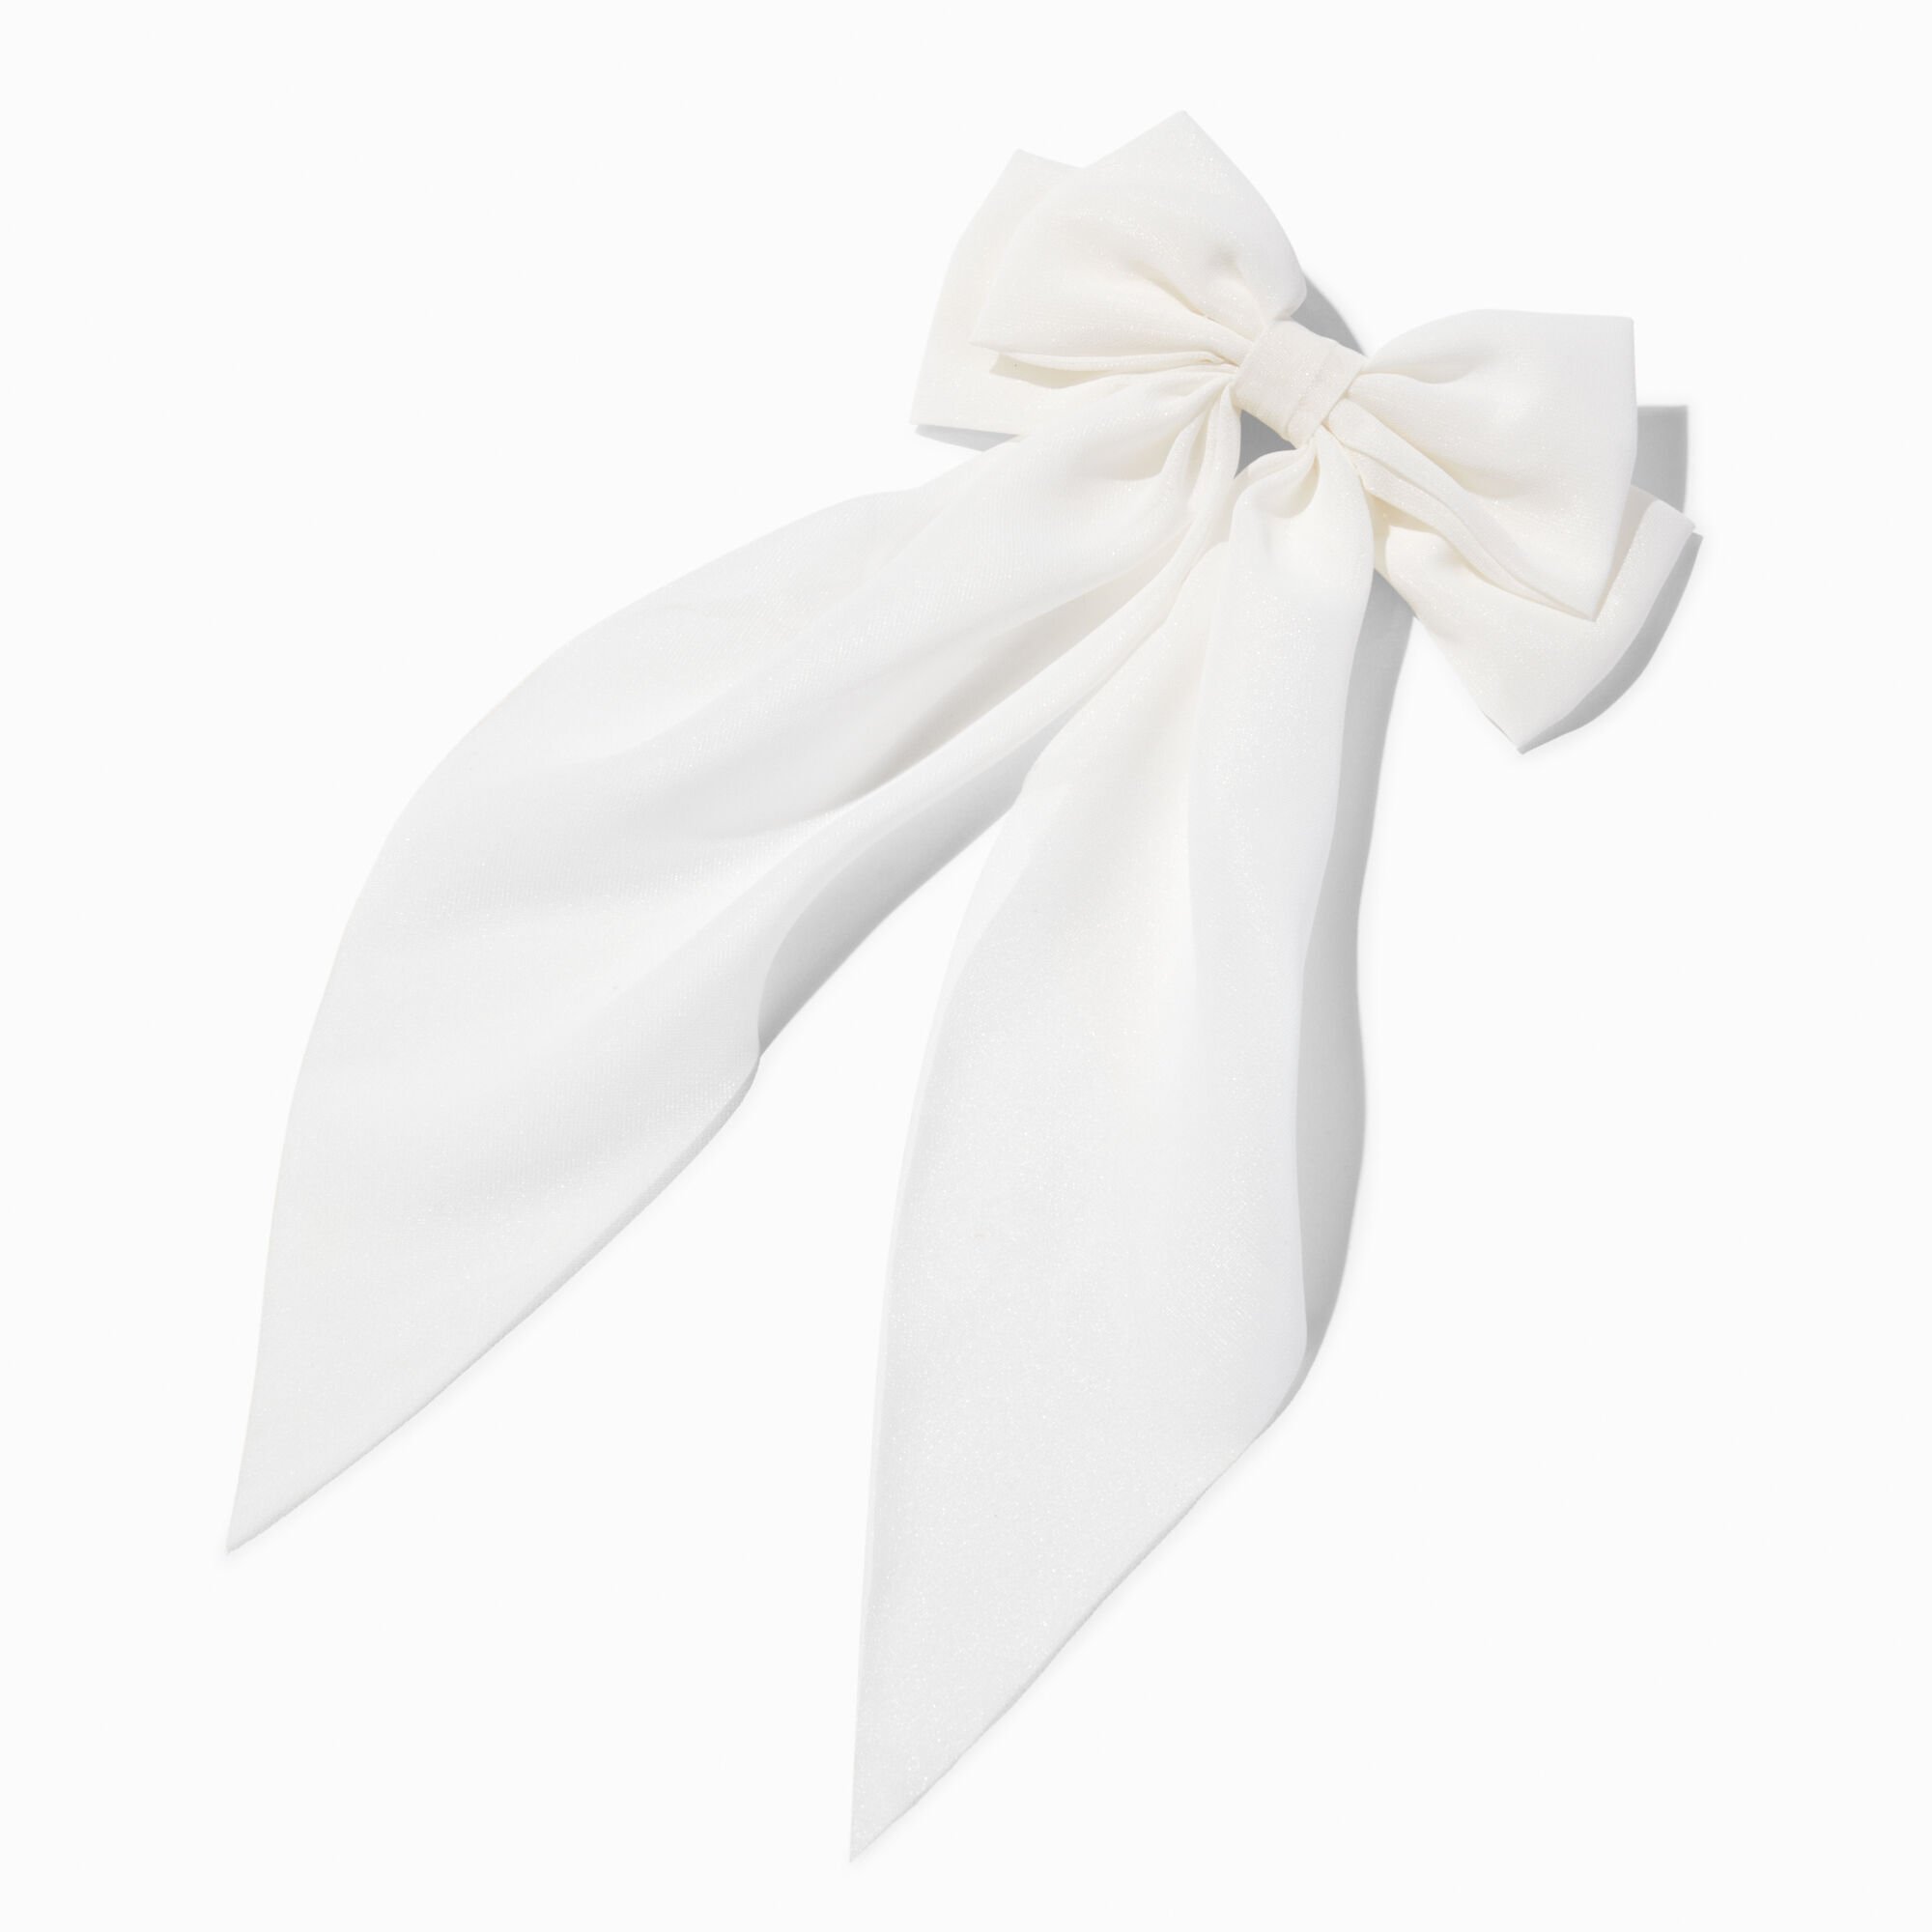 View Claires Bow Barrette Hair Clip White information